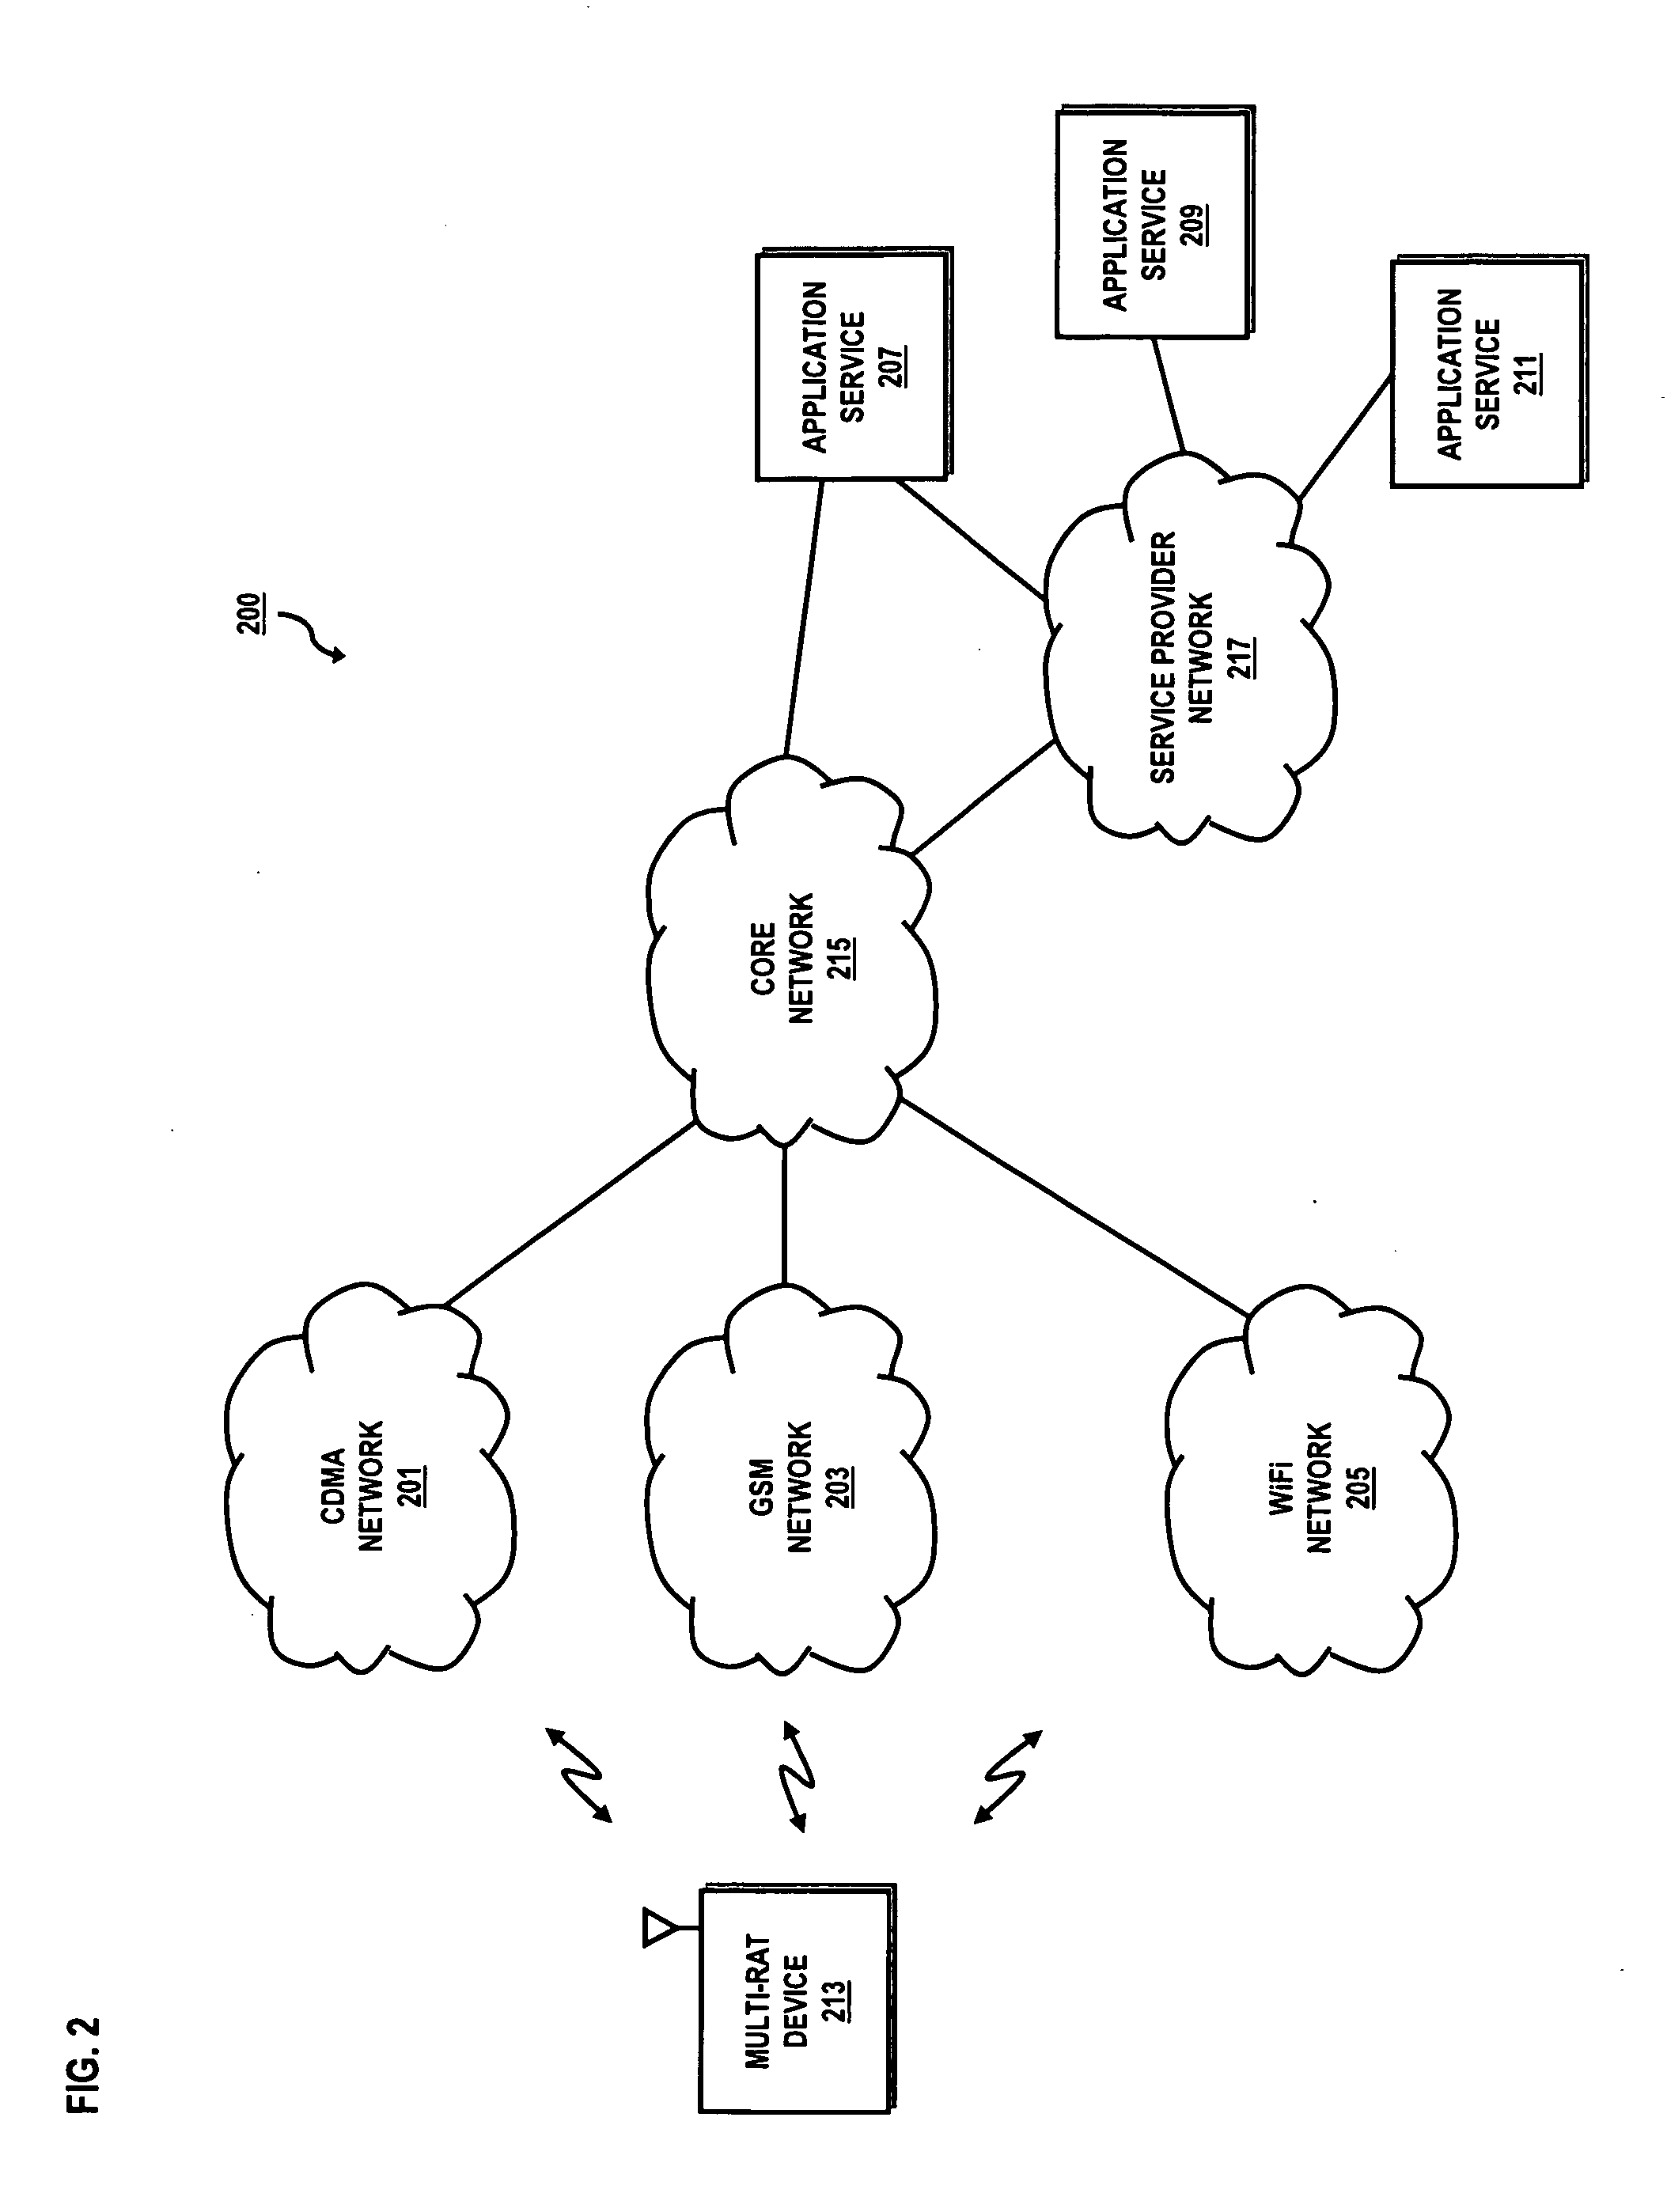 Method and system for load-balancing across multiple access networks